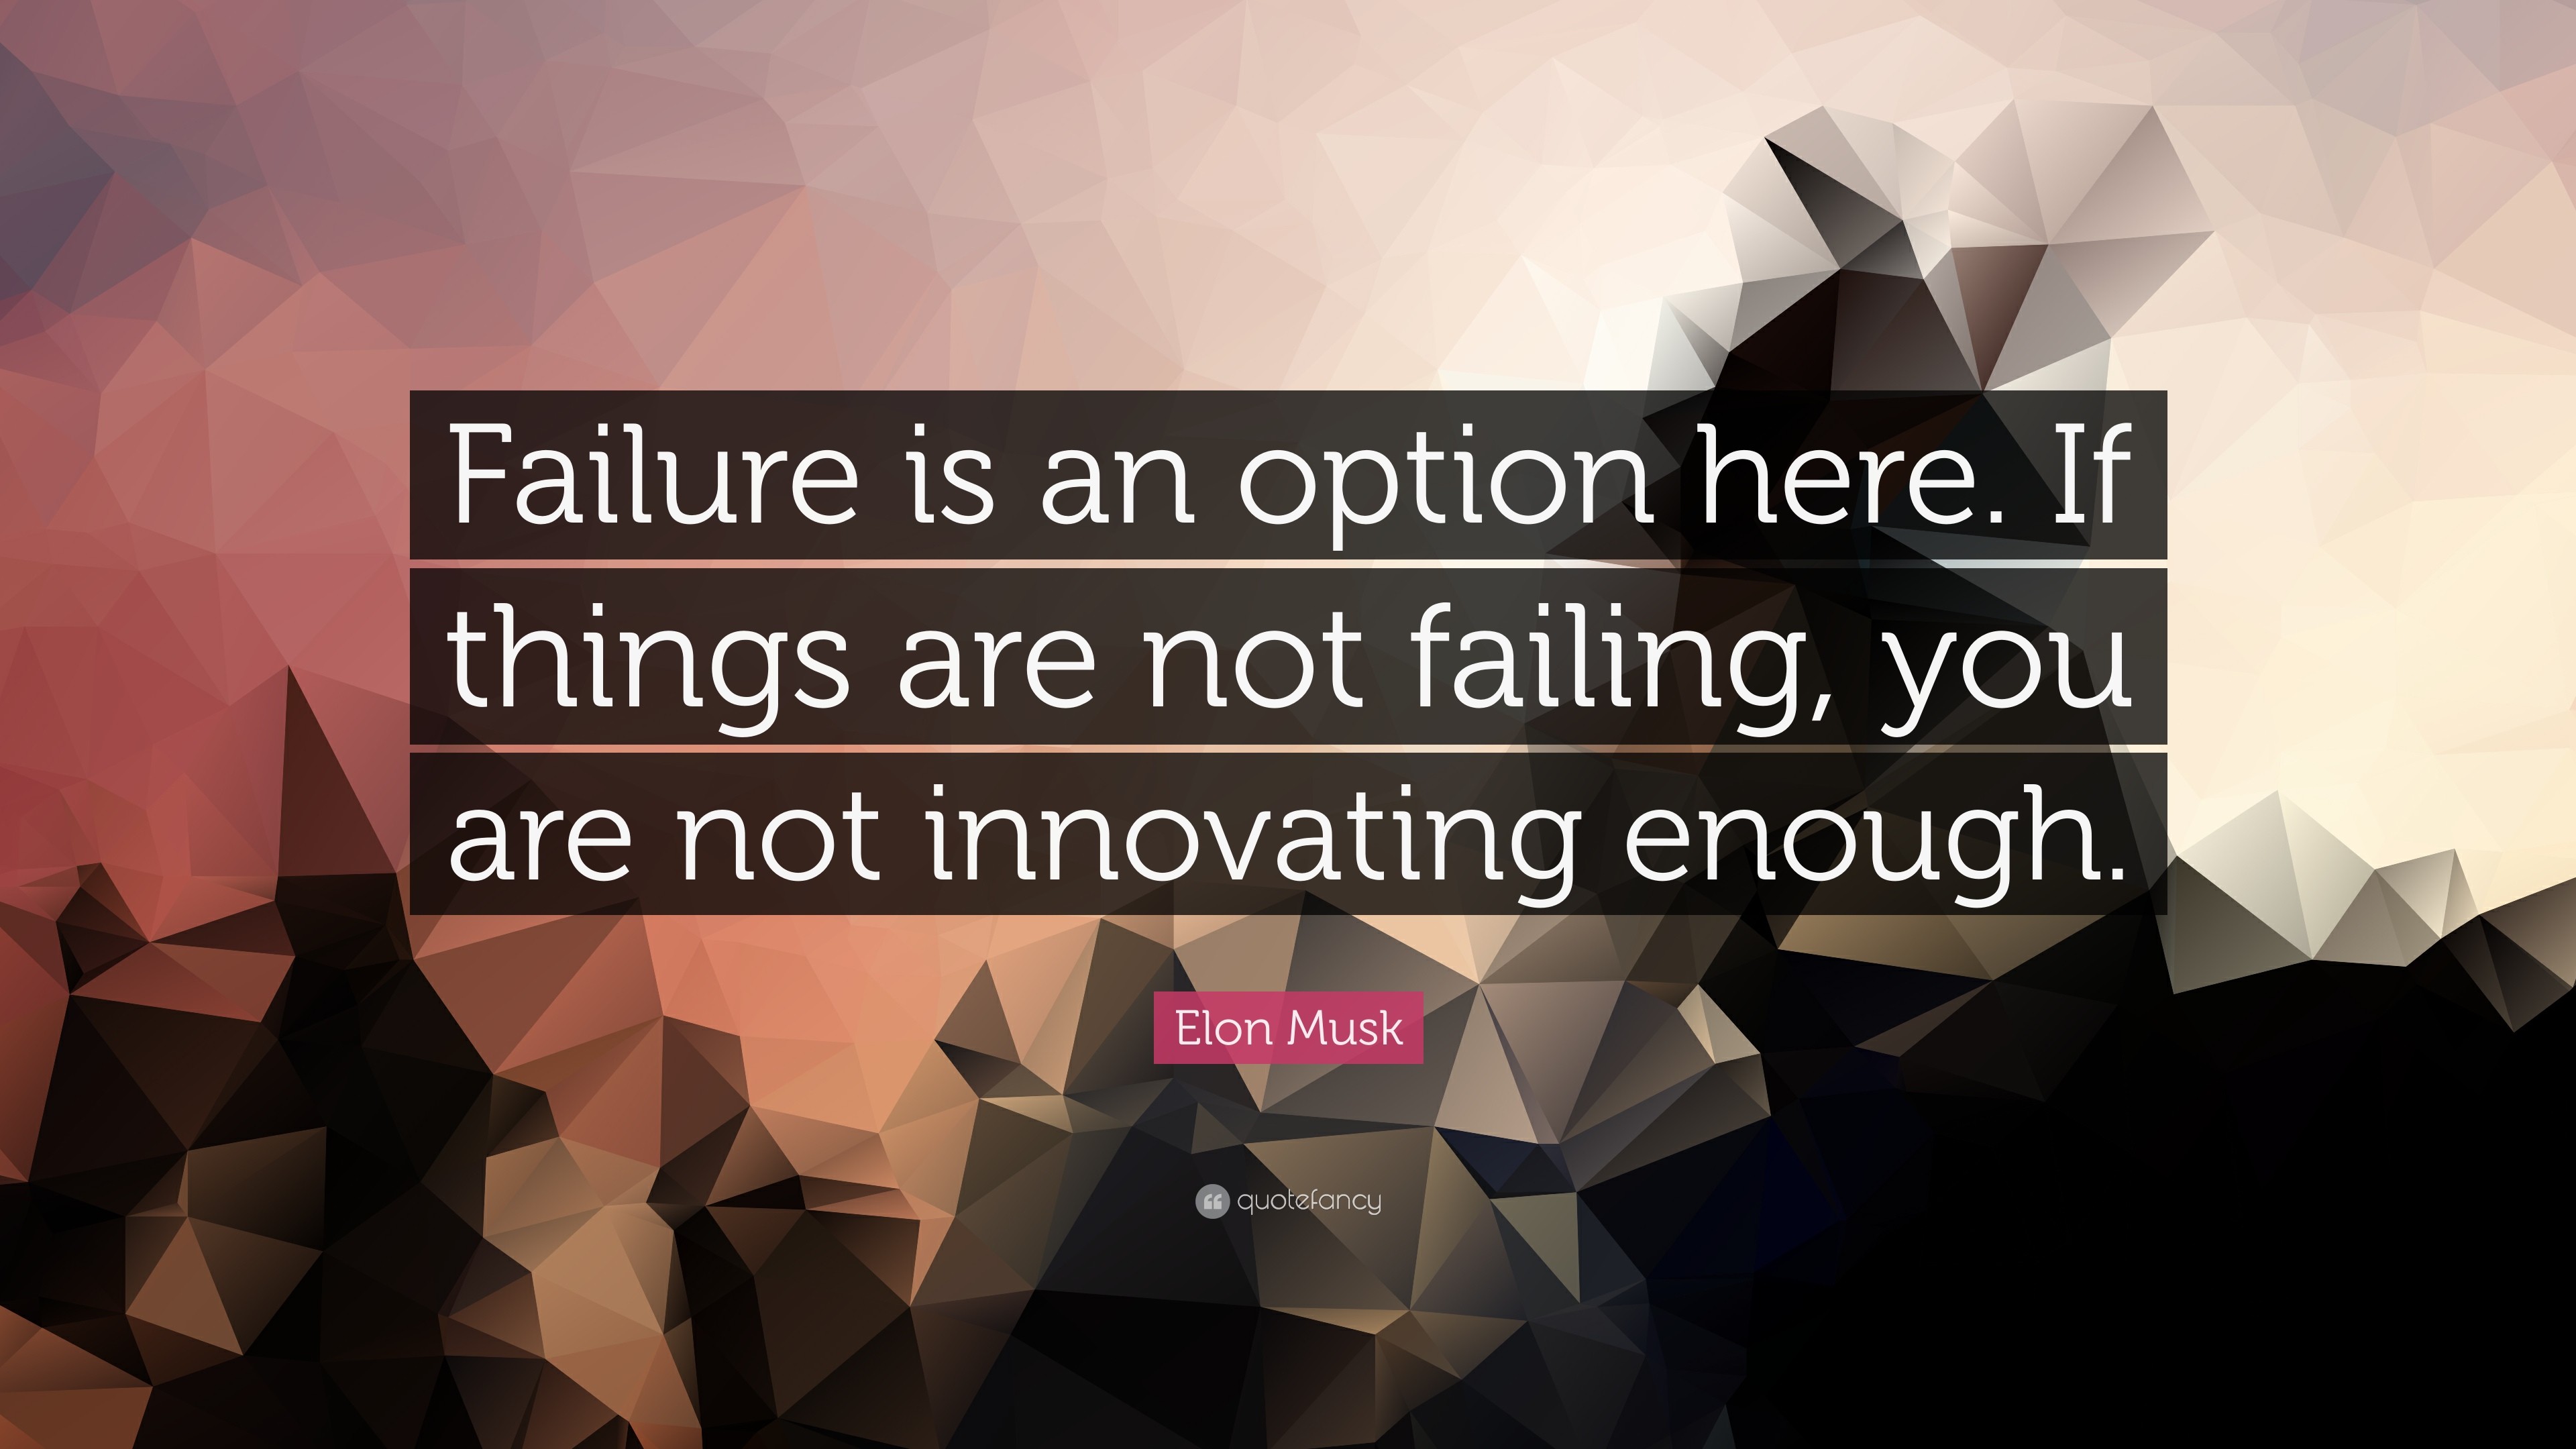 Elon Musk Quote: “Failure is an option here. If things are not failing